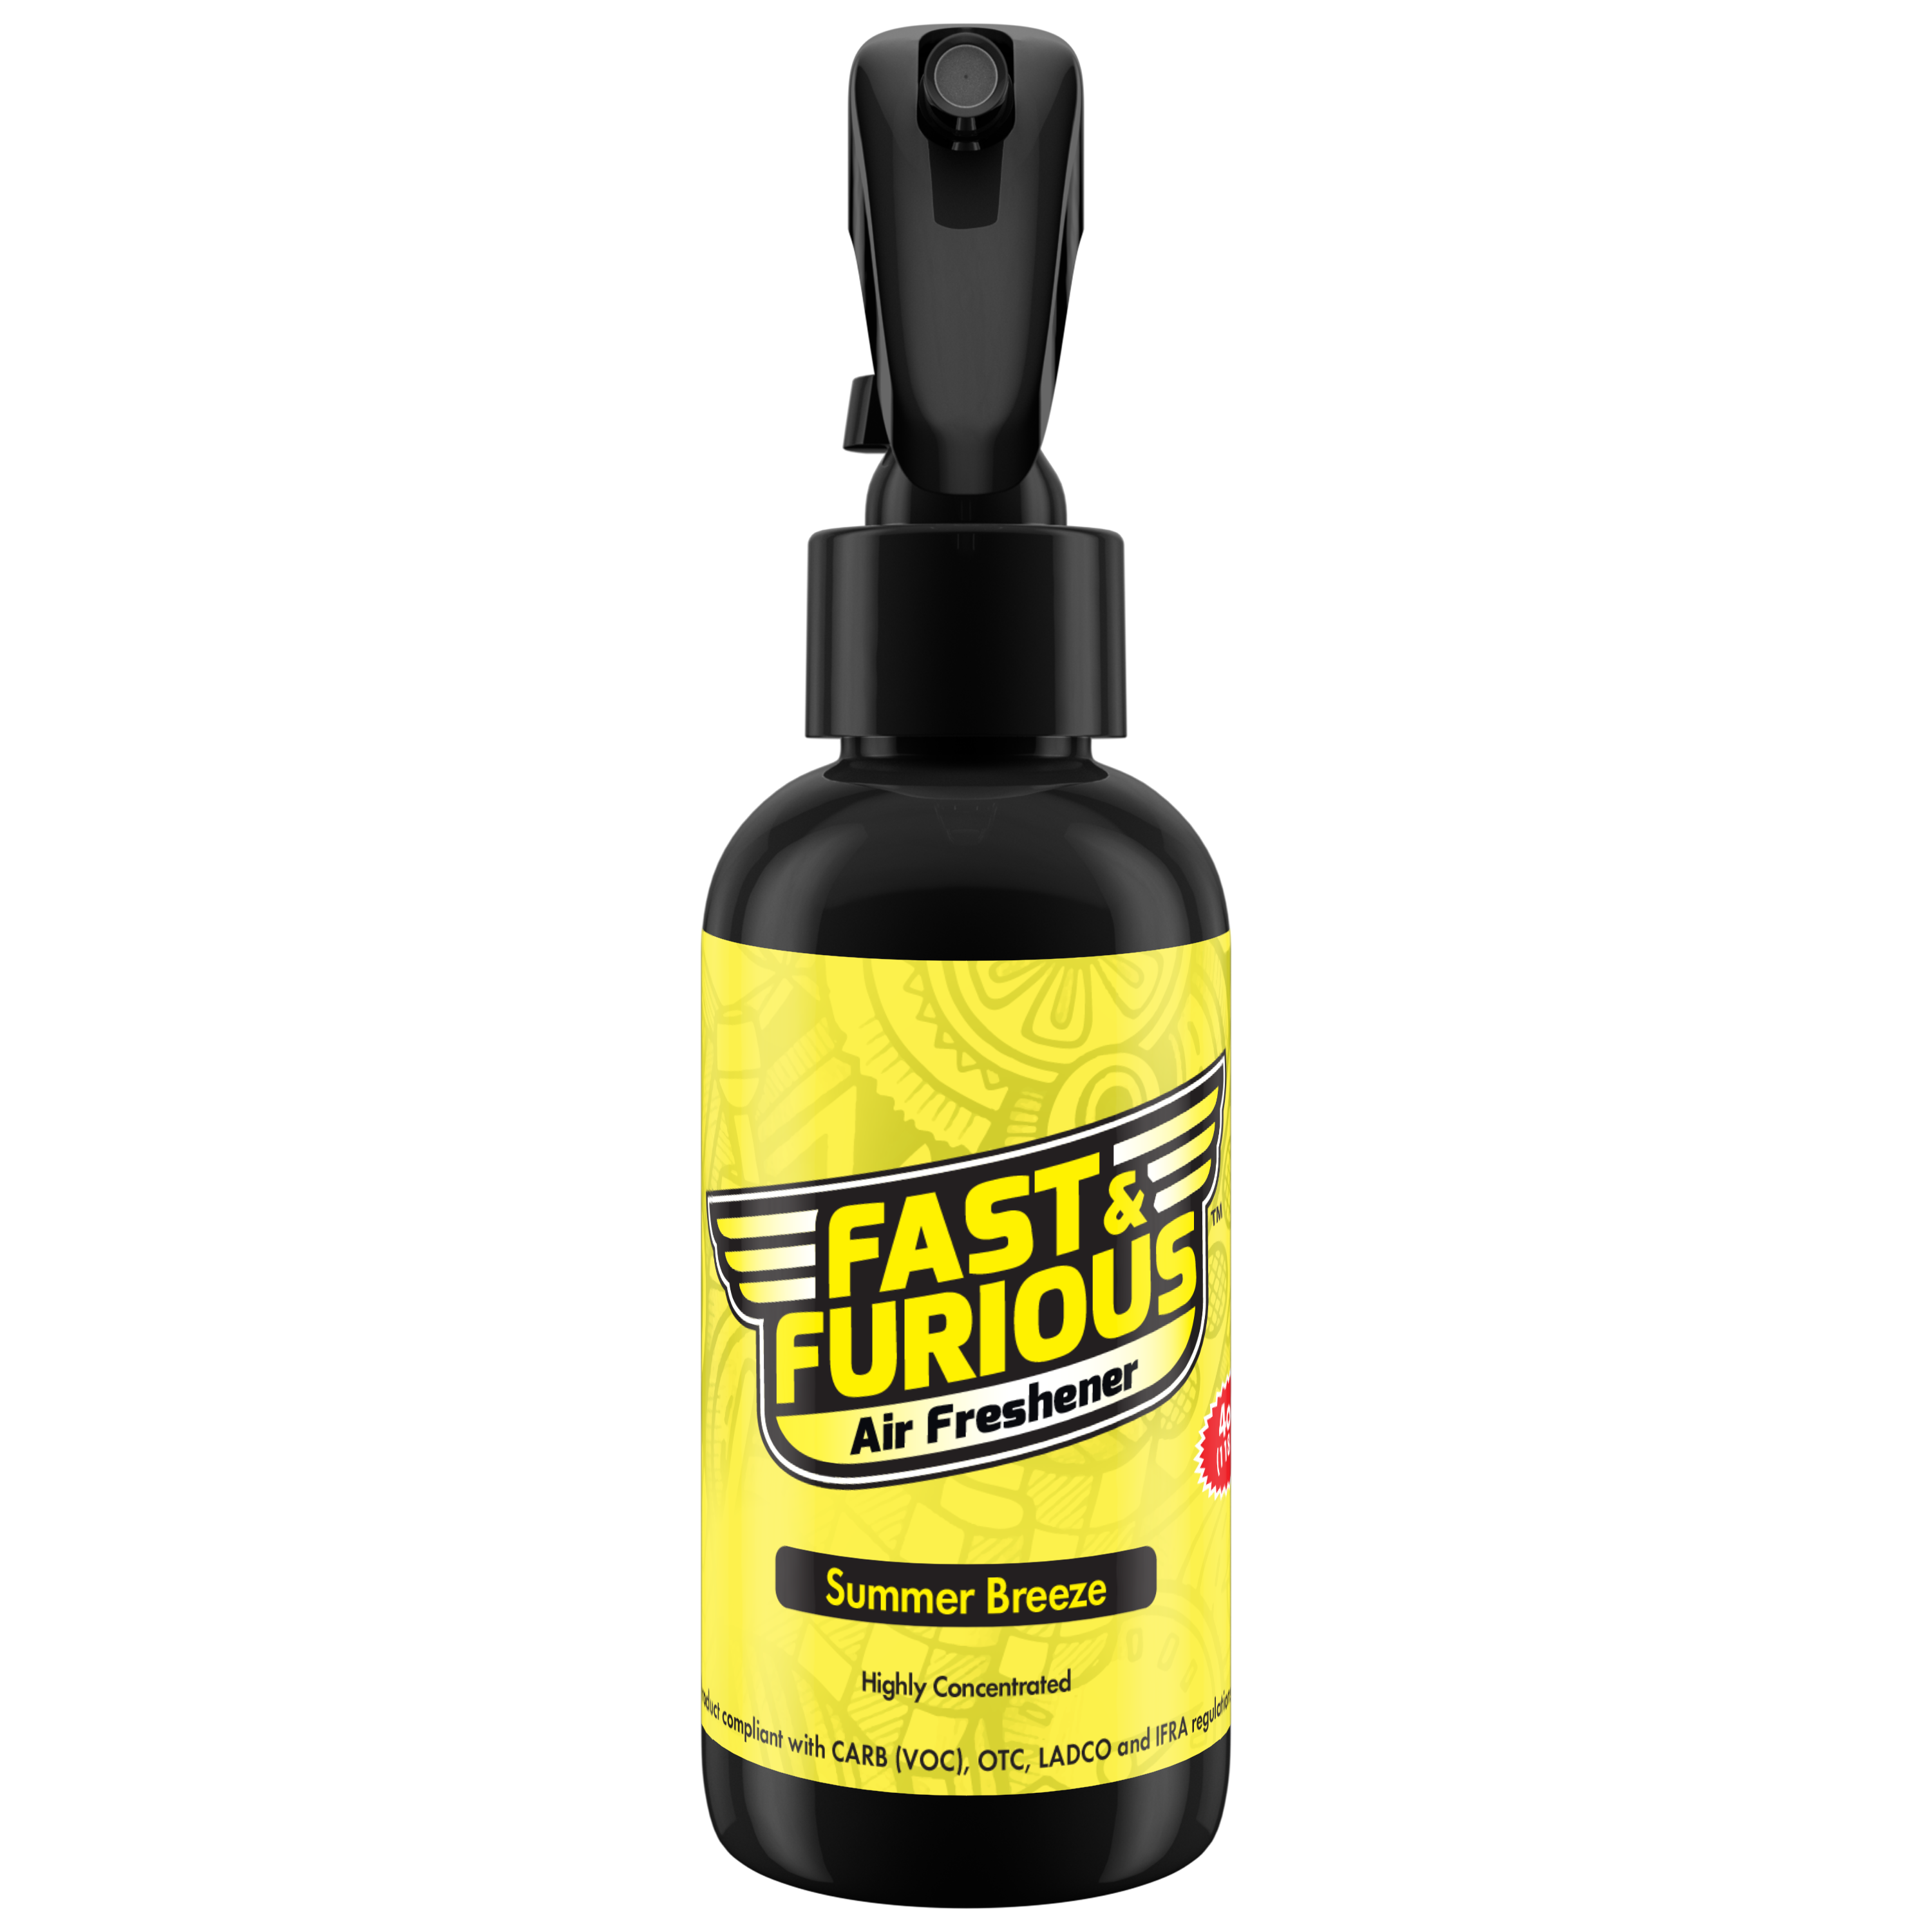 Fast and Furious Air Freshener - Summer Breeze Scent